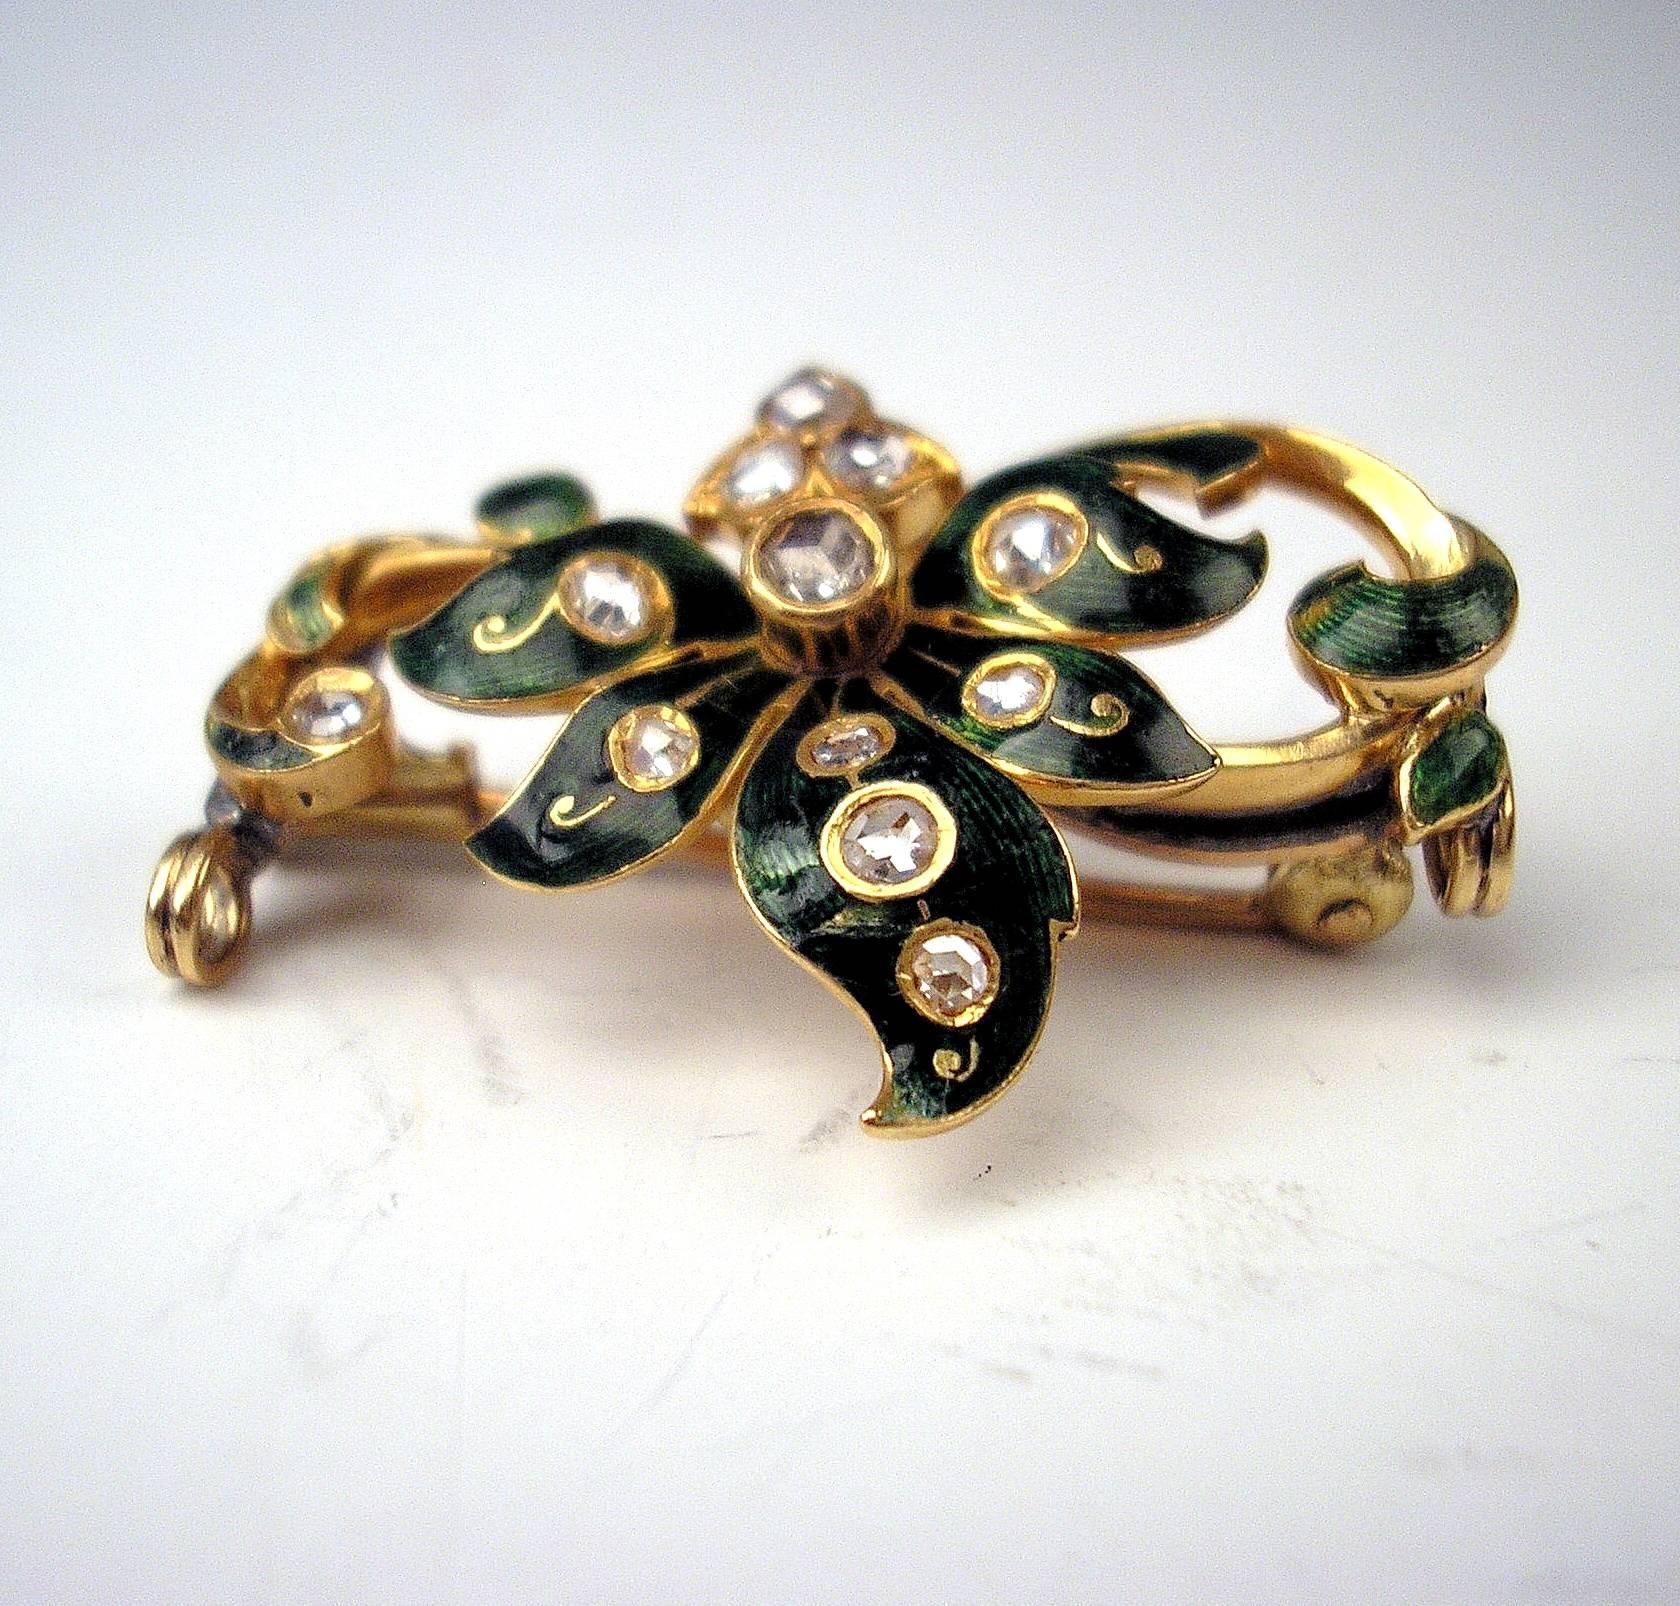 Art Nouveau Brooch
Vienna, made c. 1900
14 Carat Gold  /  585   (checked)
Yellow Gold, covered with enamel as well as with many small diamonds (vintage cuts  /  circa 0.40 carat in total). - The brooch is shaped in floral form type   ( = scrolls